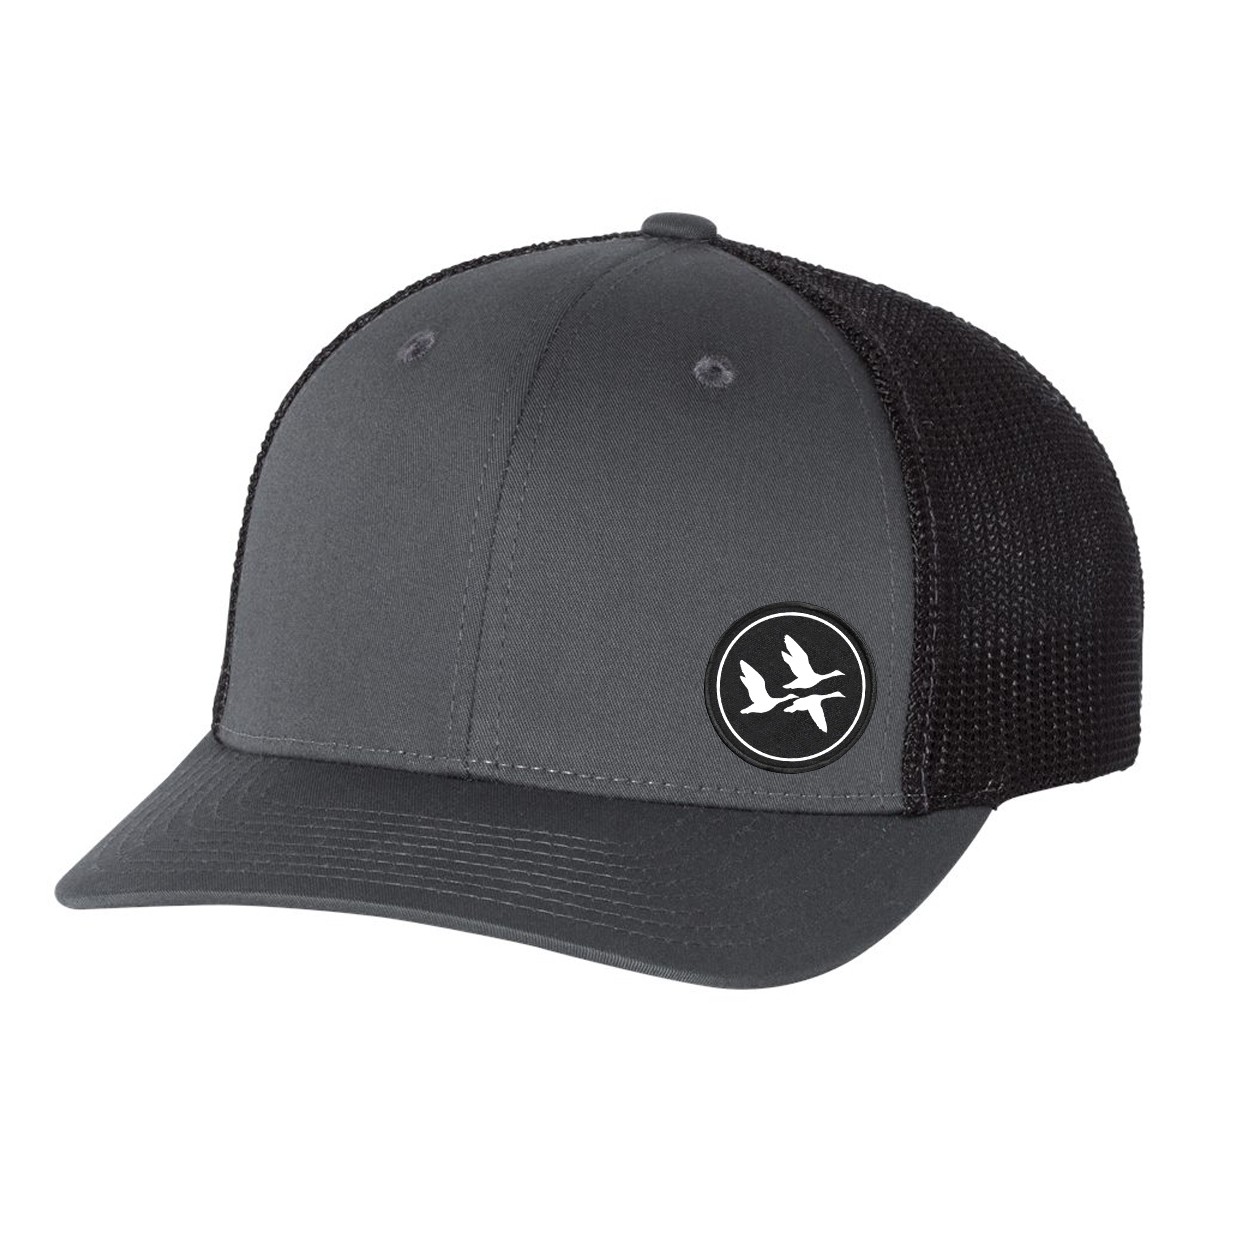 Hunt Duck Icon Logo Night Out Woven Circle Patch Snapback Trucker Hat Gray/Black (White Logo)